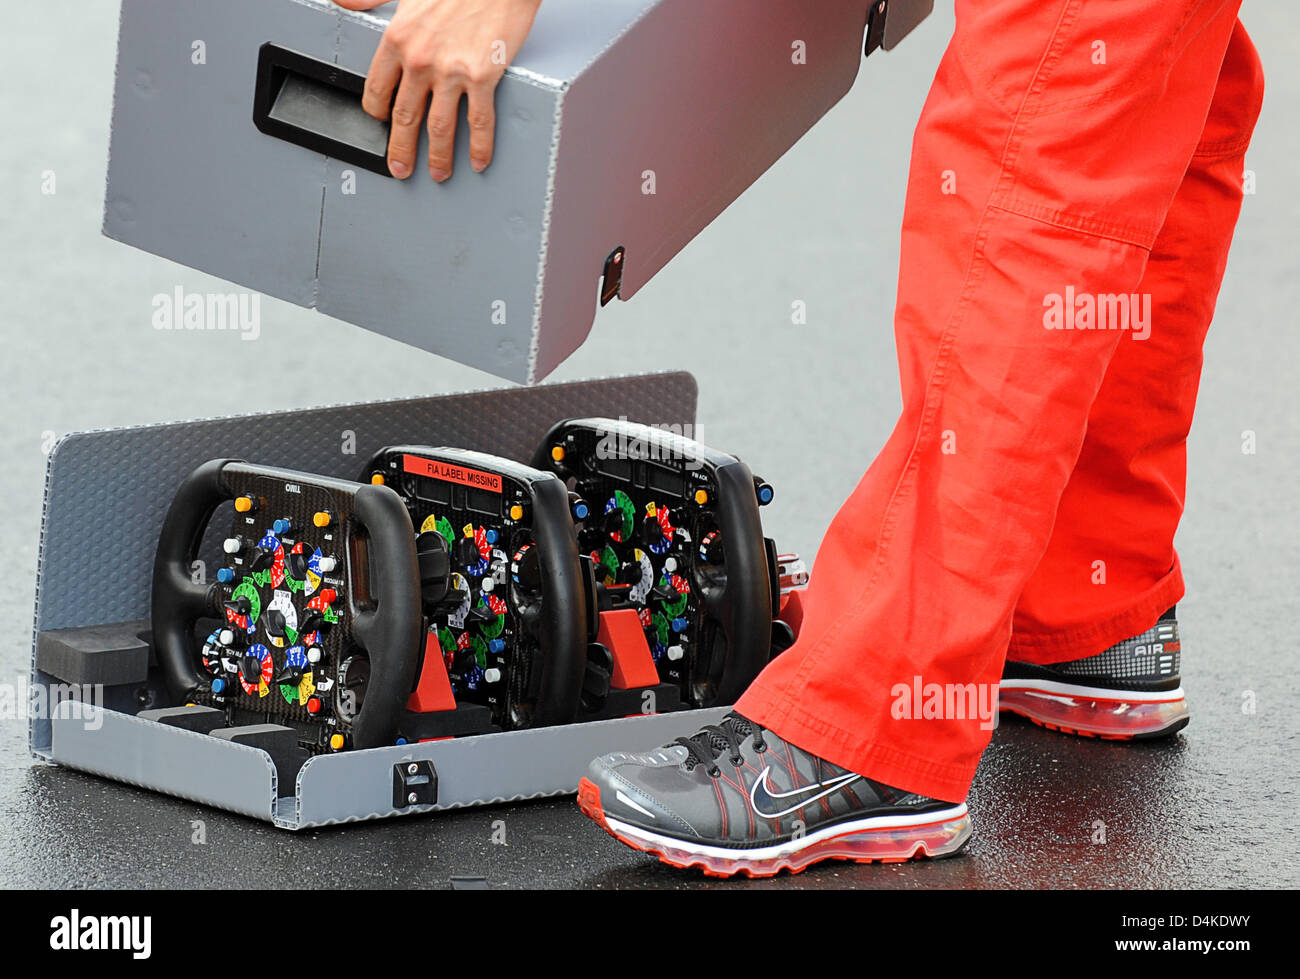 A man closes the transportation box for the steering wheels of the Toyota racing cars at Nurburgring in Nuerburg, Germany, 09 July 2009. The Formula 1 Grand Prix of Germany will take place on 12 July. Photo: Peter Steffen Stock Photo